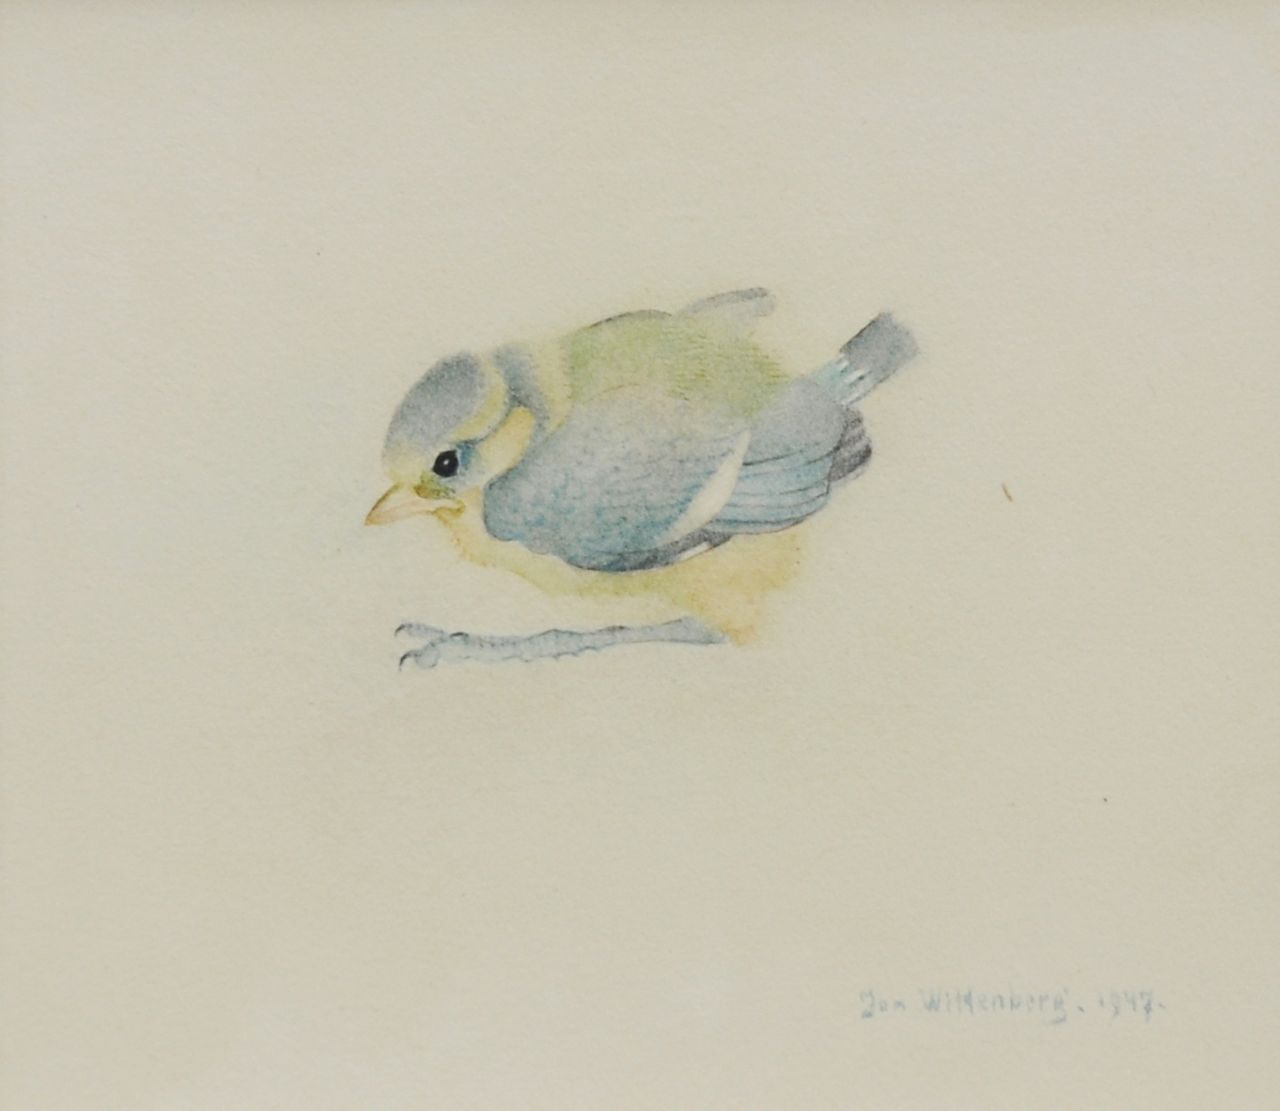 Wittenberg J.H.W.  | 'Jan' Hendrik Willem Wittenberg, A young bluetit, watercolour on paper 10.8 x 13.3 cm, signed l.r. and dated 1947